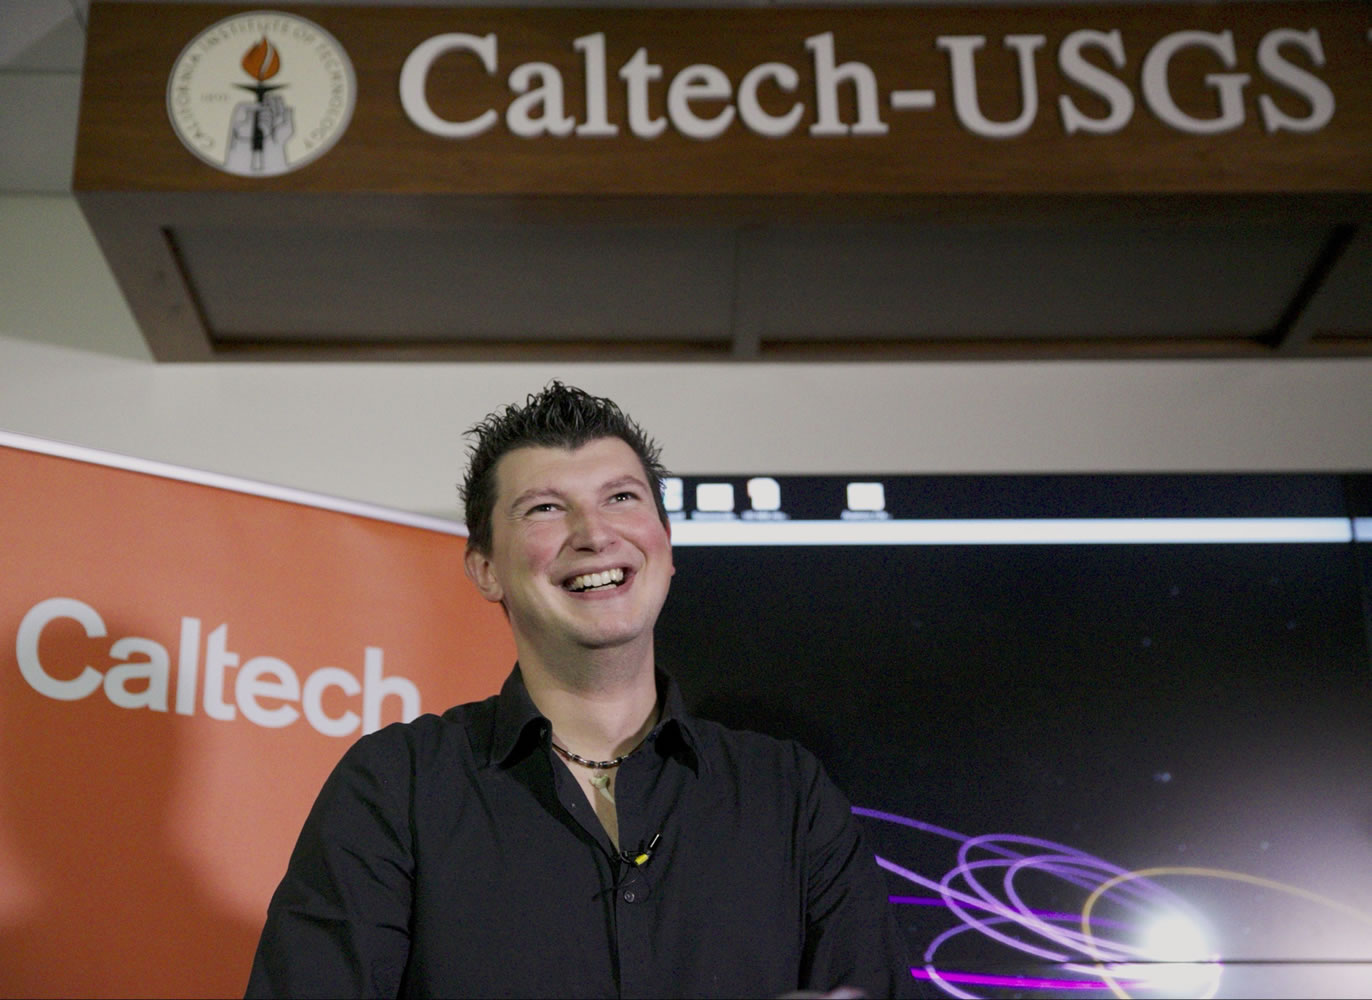 California Institute of Technology Konstantin Batygin, Assistant Professor of Planetary Science smiles as he takes questions about Planet 9 at the CalTech USGS Media center in Pasadena, Calif., on Wednesday, Jan. 20, 2016. Scientists reported Wednesday, they finally have &quot;good evidence&quot; for Planet 9, a true ninth planet on the fringes of our solar system. The gas giant is thought to be almost as big as Neptune and orbiting billions of miles beyond Neptune&#039;s path, distant enough to take 10,000 to 20,000 years to circle the sun. Planet 9, as Batygin and astronomer Mike Brown call it, hasn&#039;t been spotted yet. They base their findings on mathematical and computer modeling, and anticipate its discovery via telescope within five years.